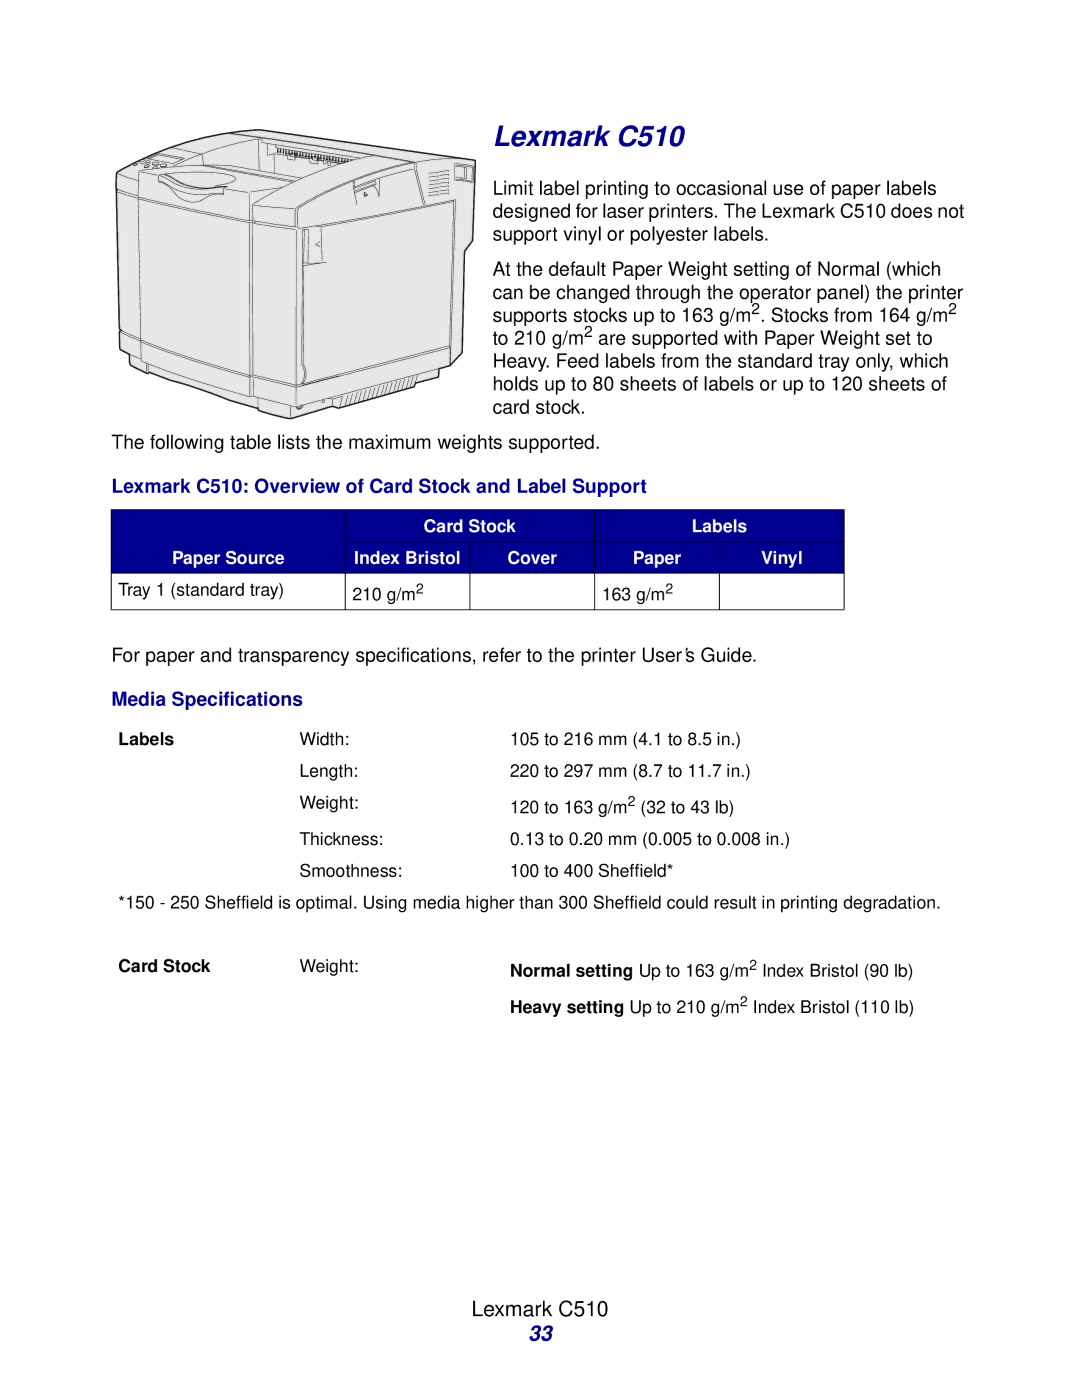 Lexmark Laser Printers manual Lexmark C510 Overview of Card Stock and Label Support 